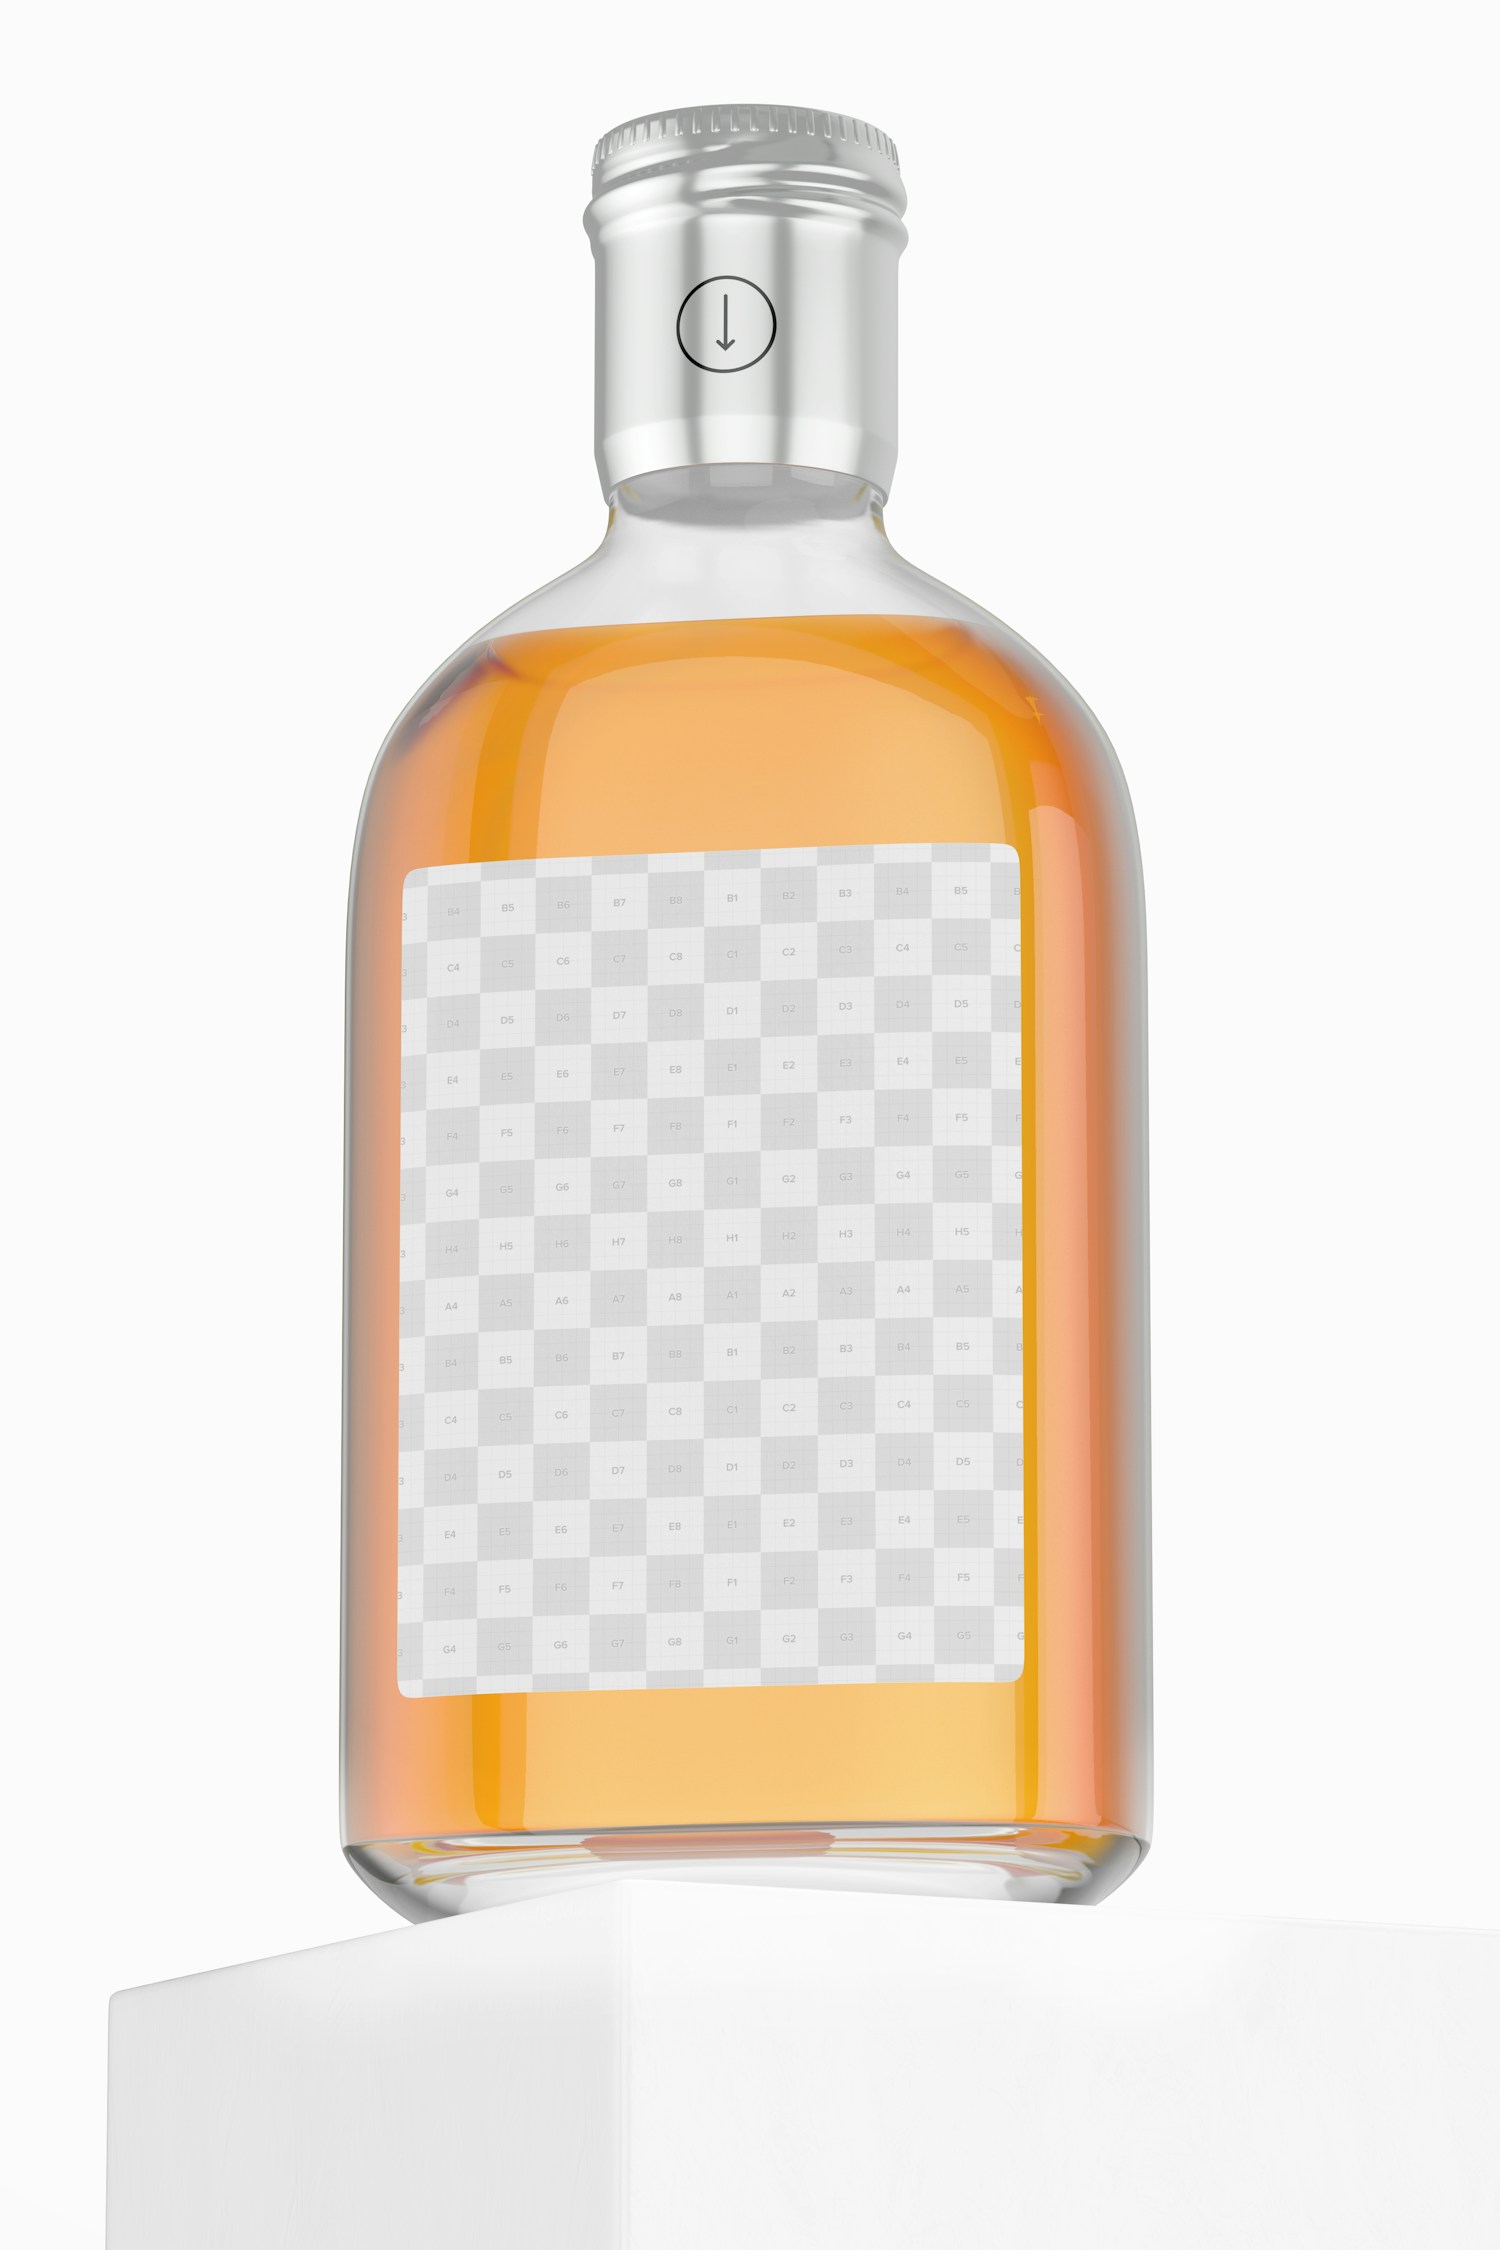 200 ml Whisky Bottle Mockup, Low Angle View